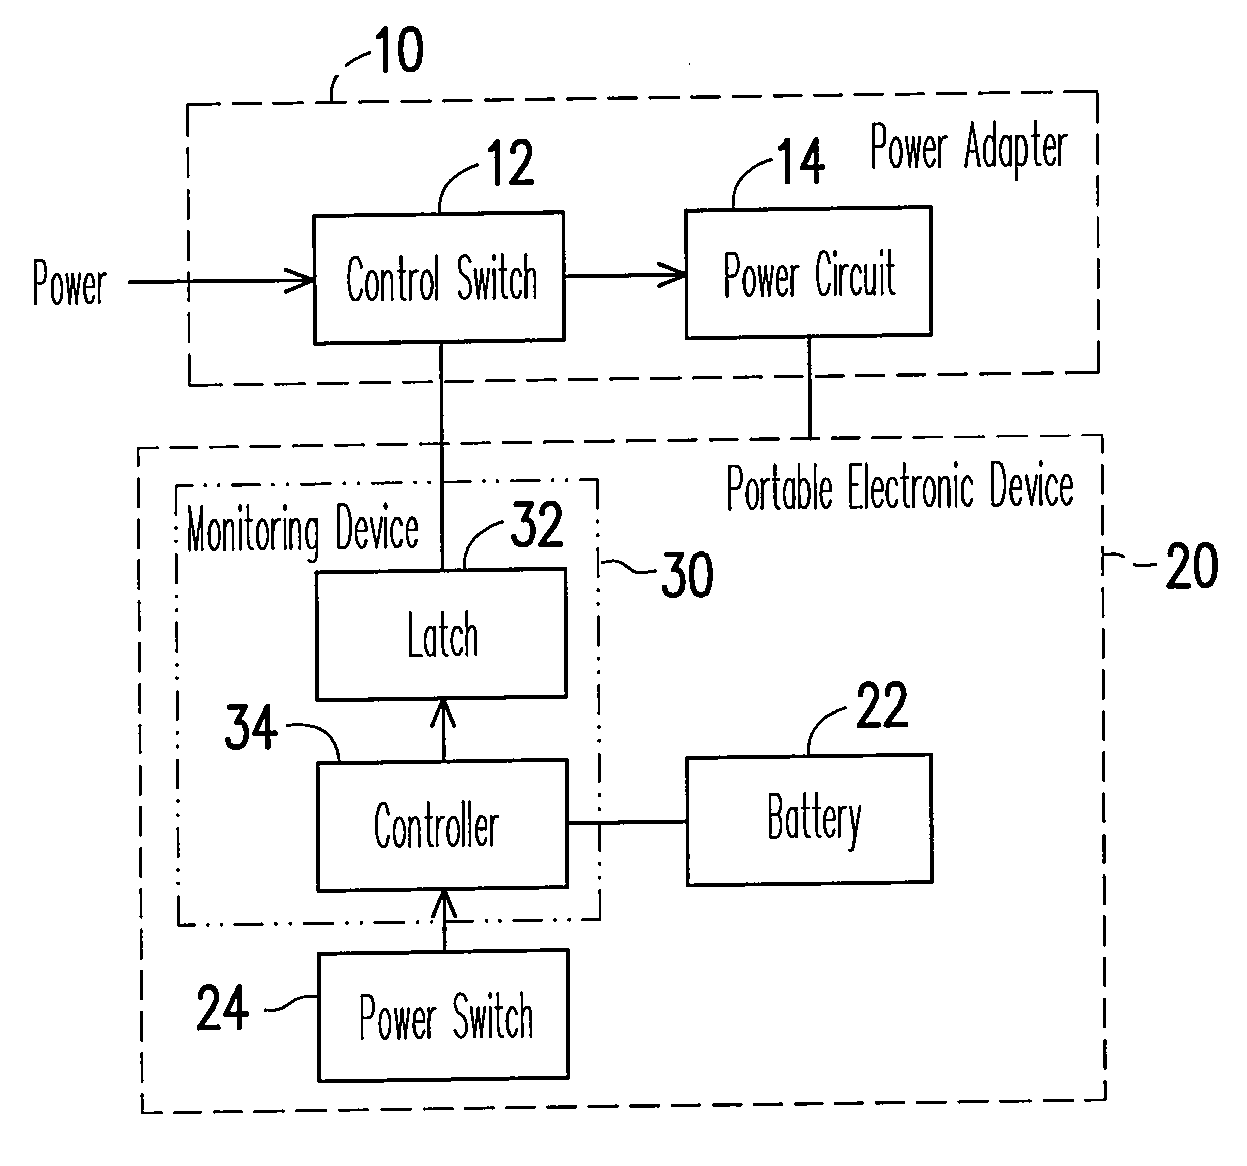 Power control system and method for controlling power adapter to input power to portable electronic device